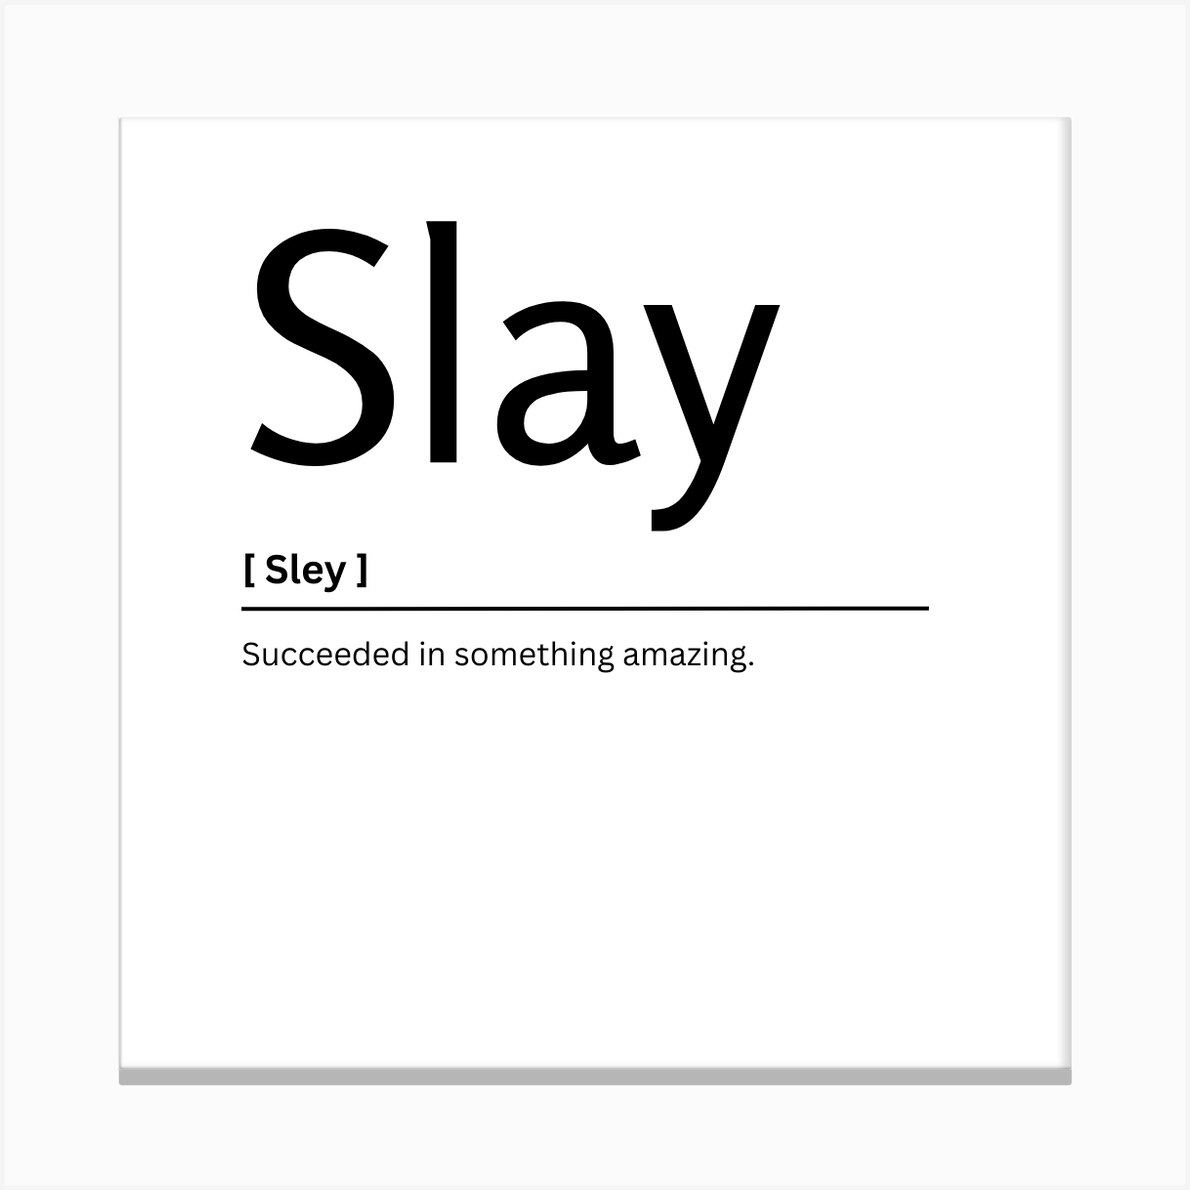 Slay Dictionary Definition Funny Quote Art Print Art Print by Kaigozen - Fy